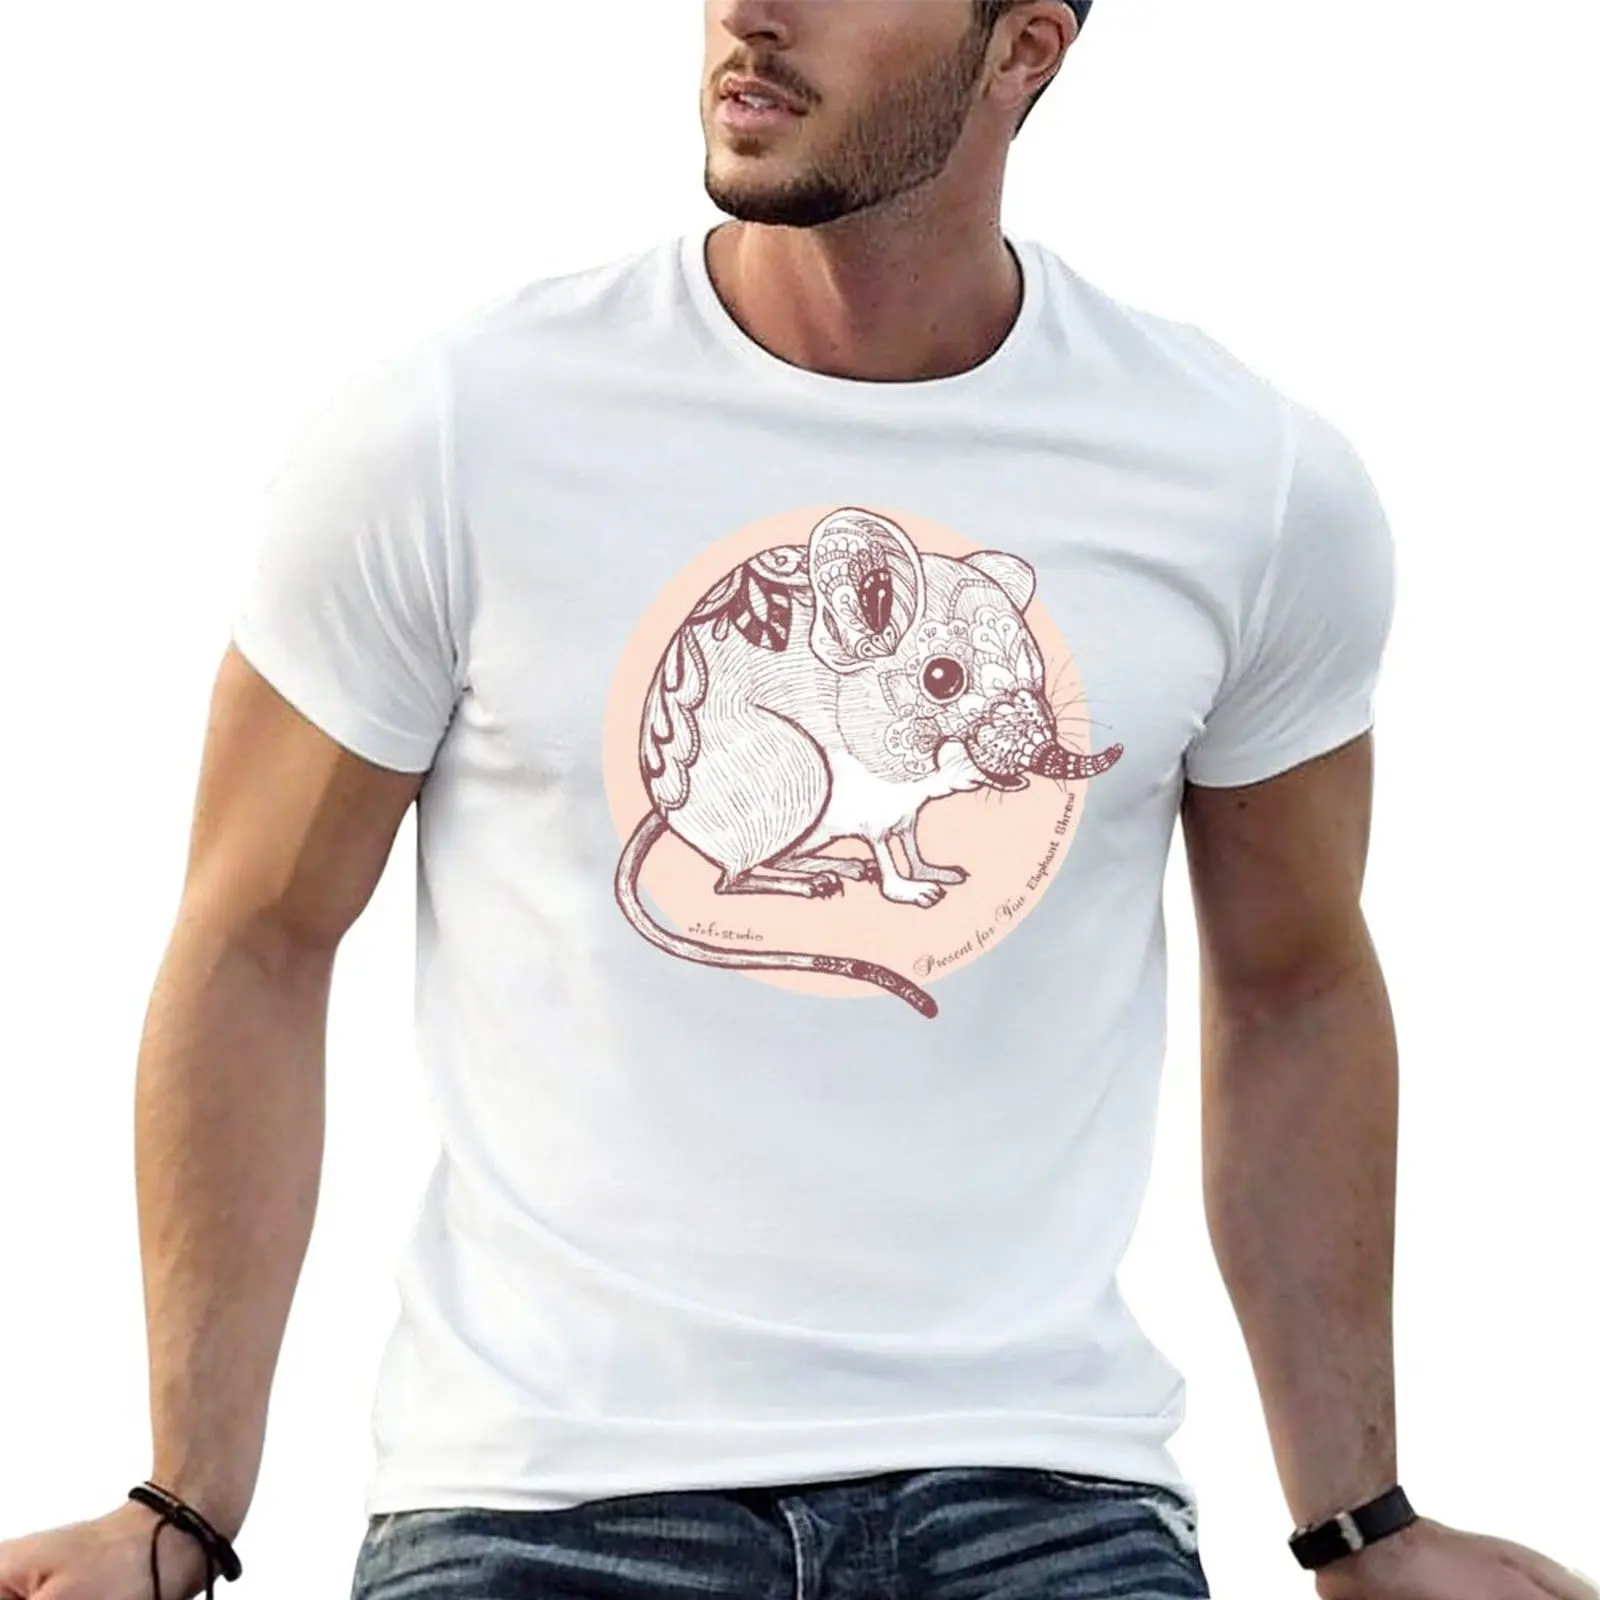 

Present for You - Elephant Shrew [Pale orange] T-Shirt custom t shirts design your own shirts graphic tees mens funny t shirts